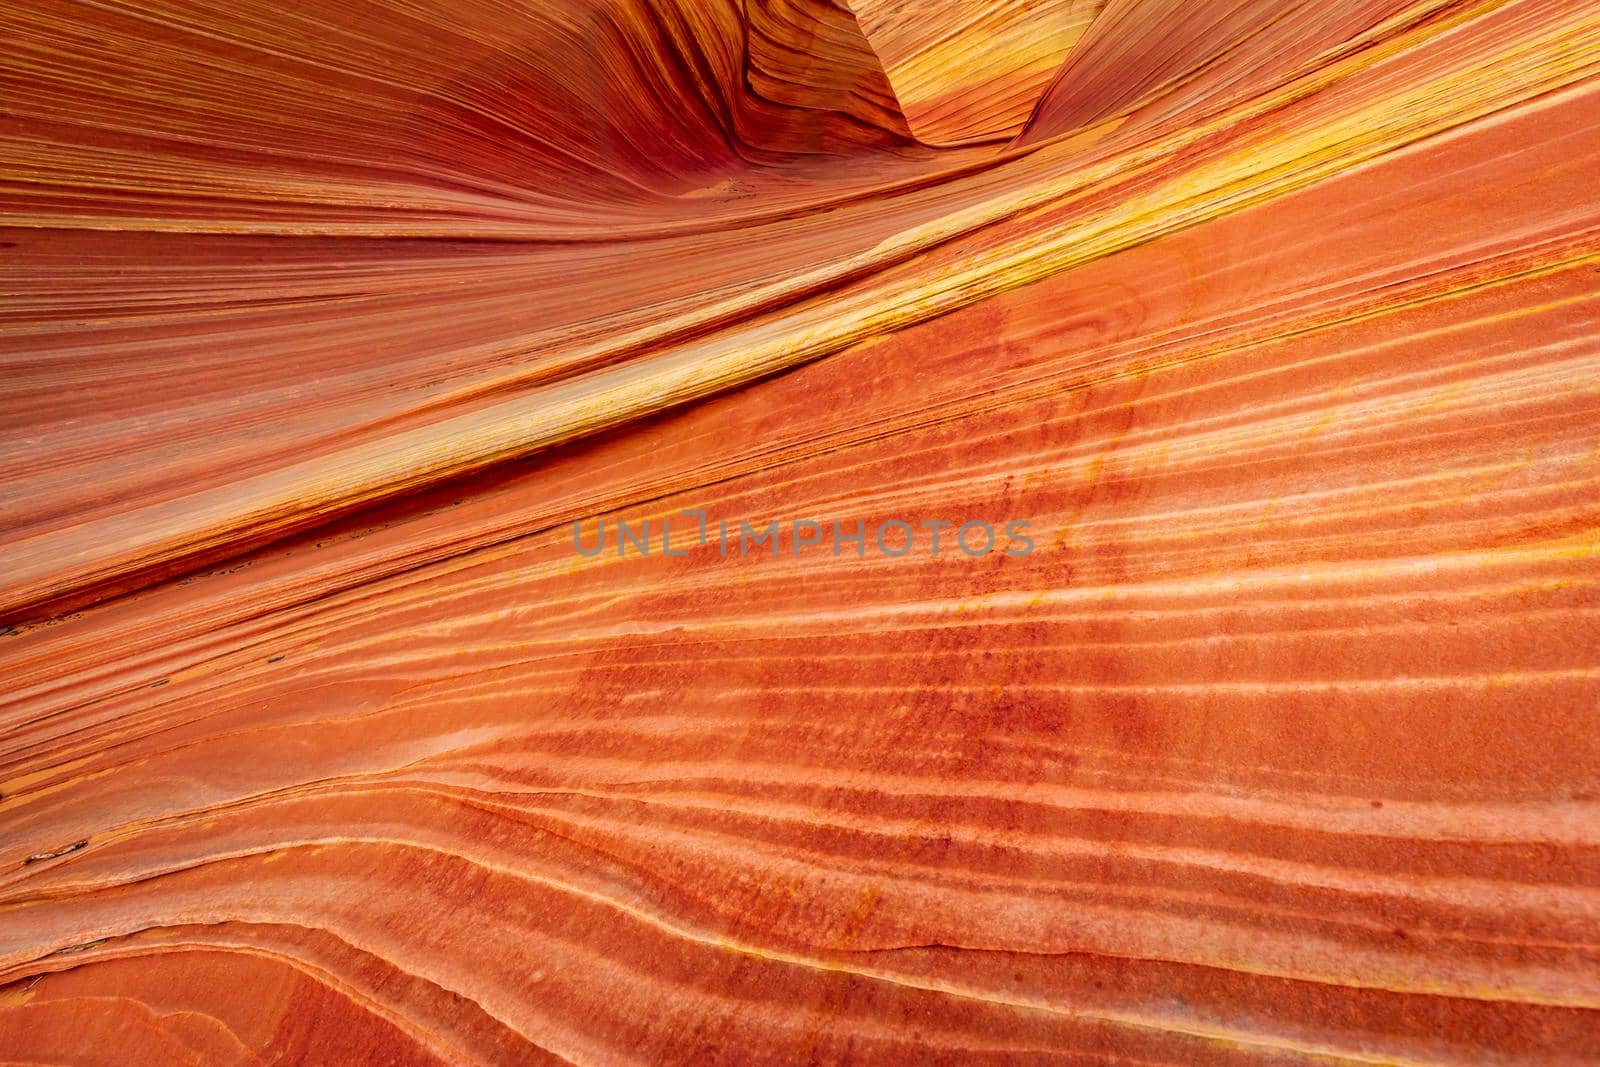 The Wave sandstone formation in Arizona by gepeng